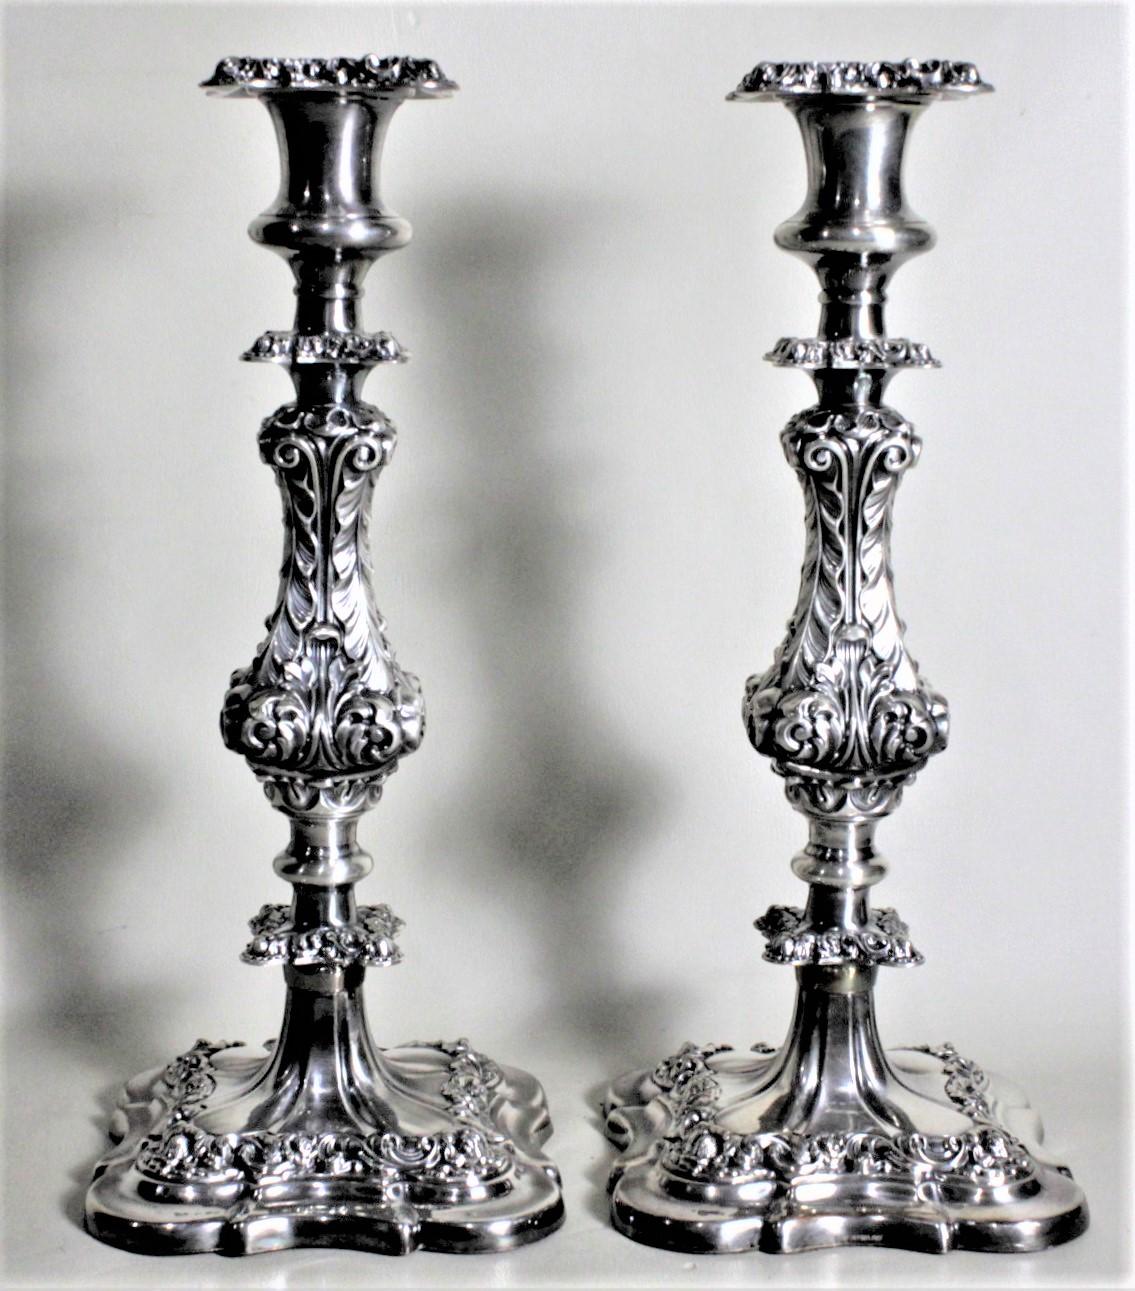 Edwardian Pair of Antique English Silver Plated Candlesticks with Chased Leaf Decoration For Sale